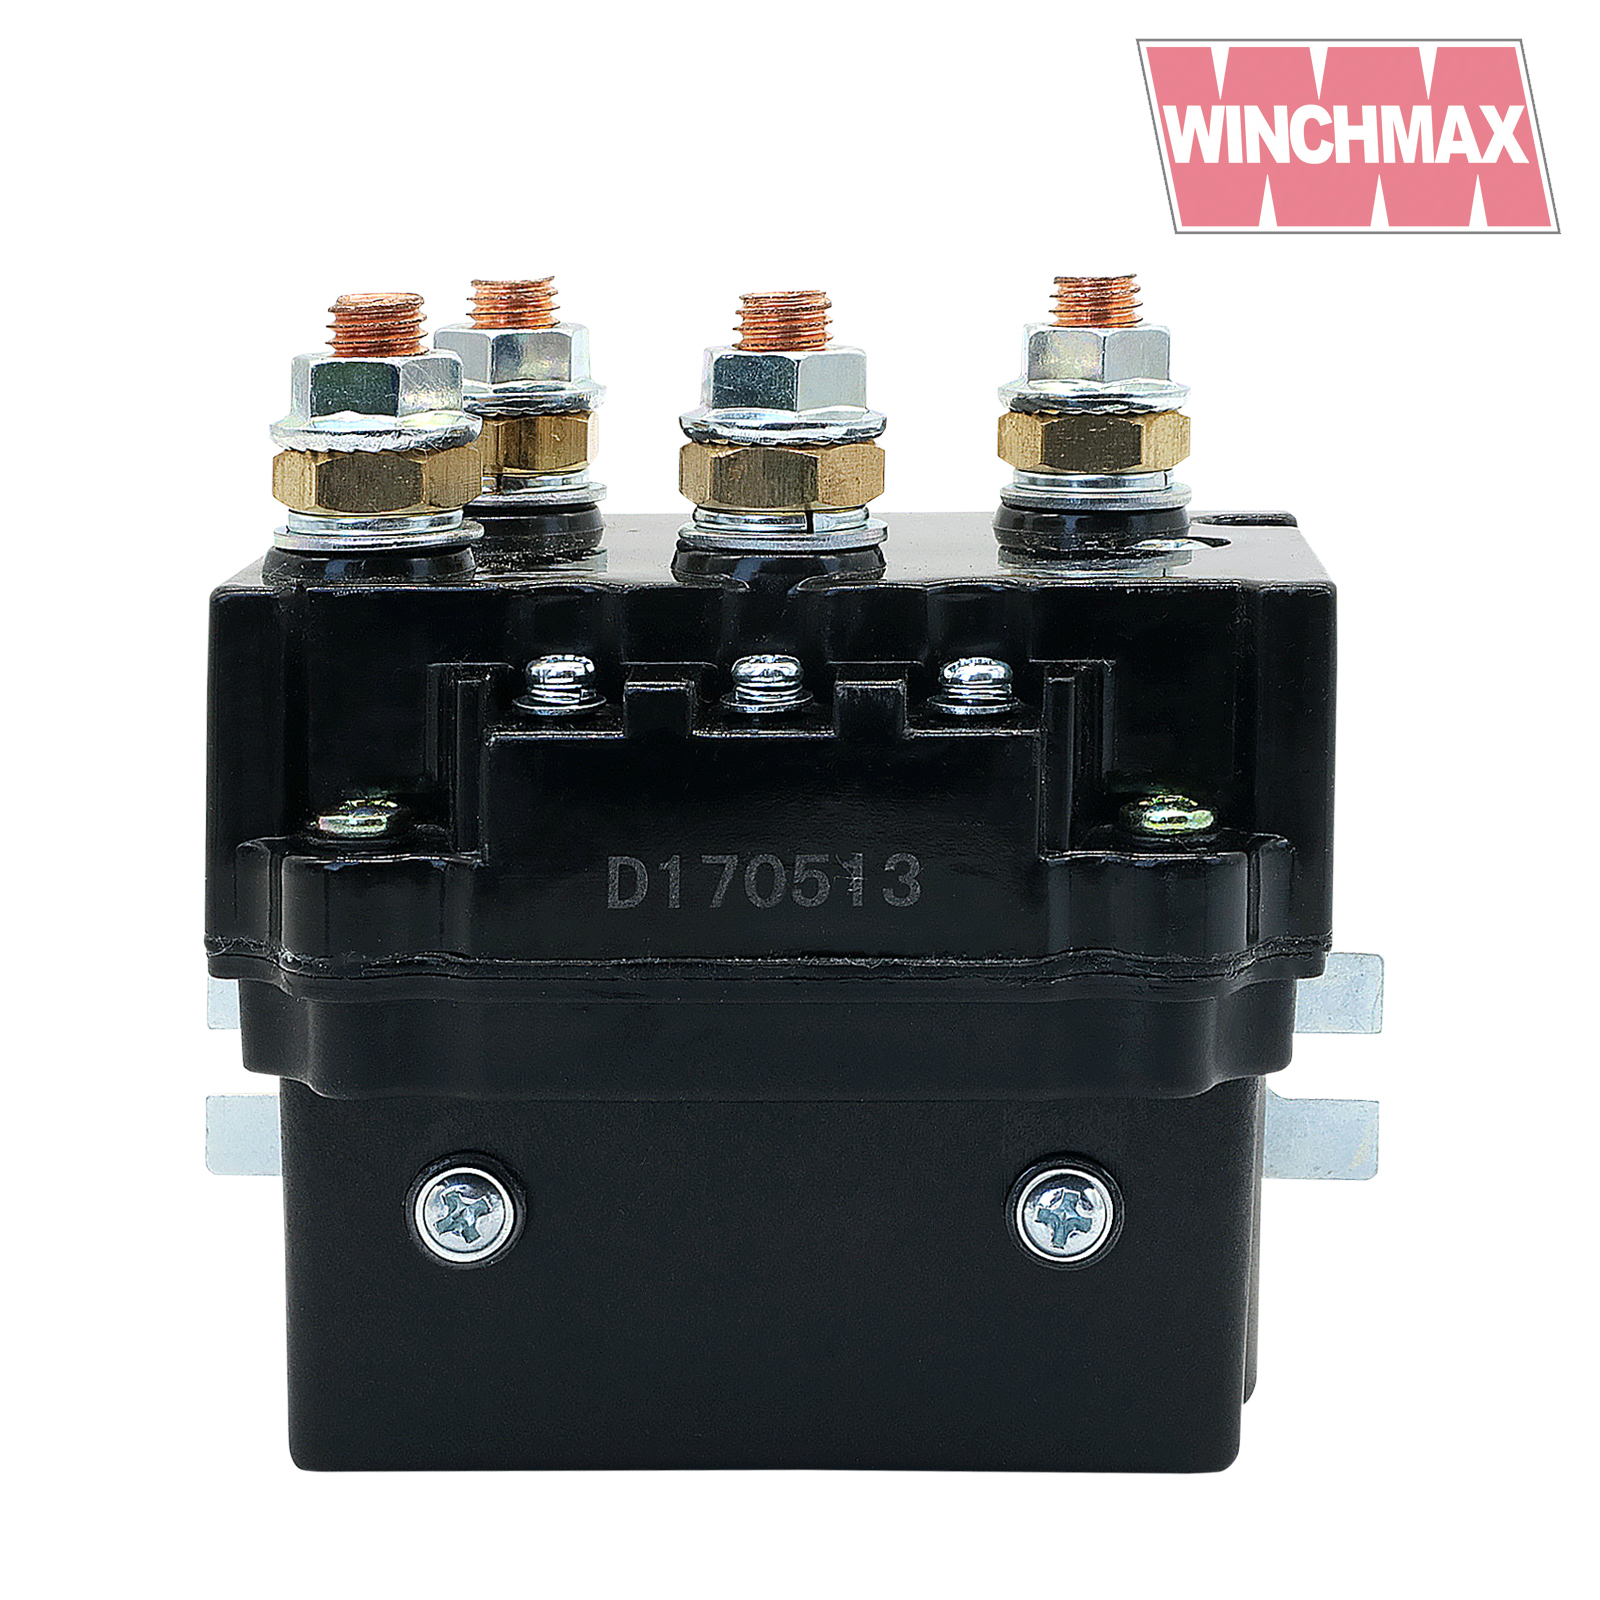 WINCHMAX 24v Winch Solenoid. Screw fit.